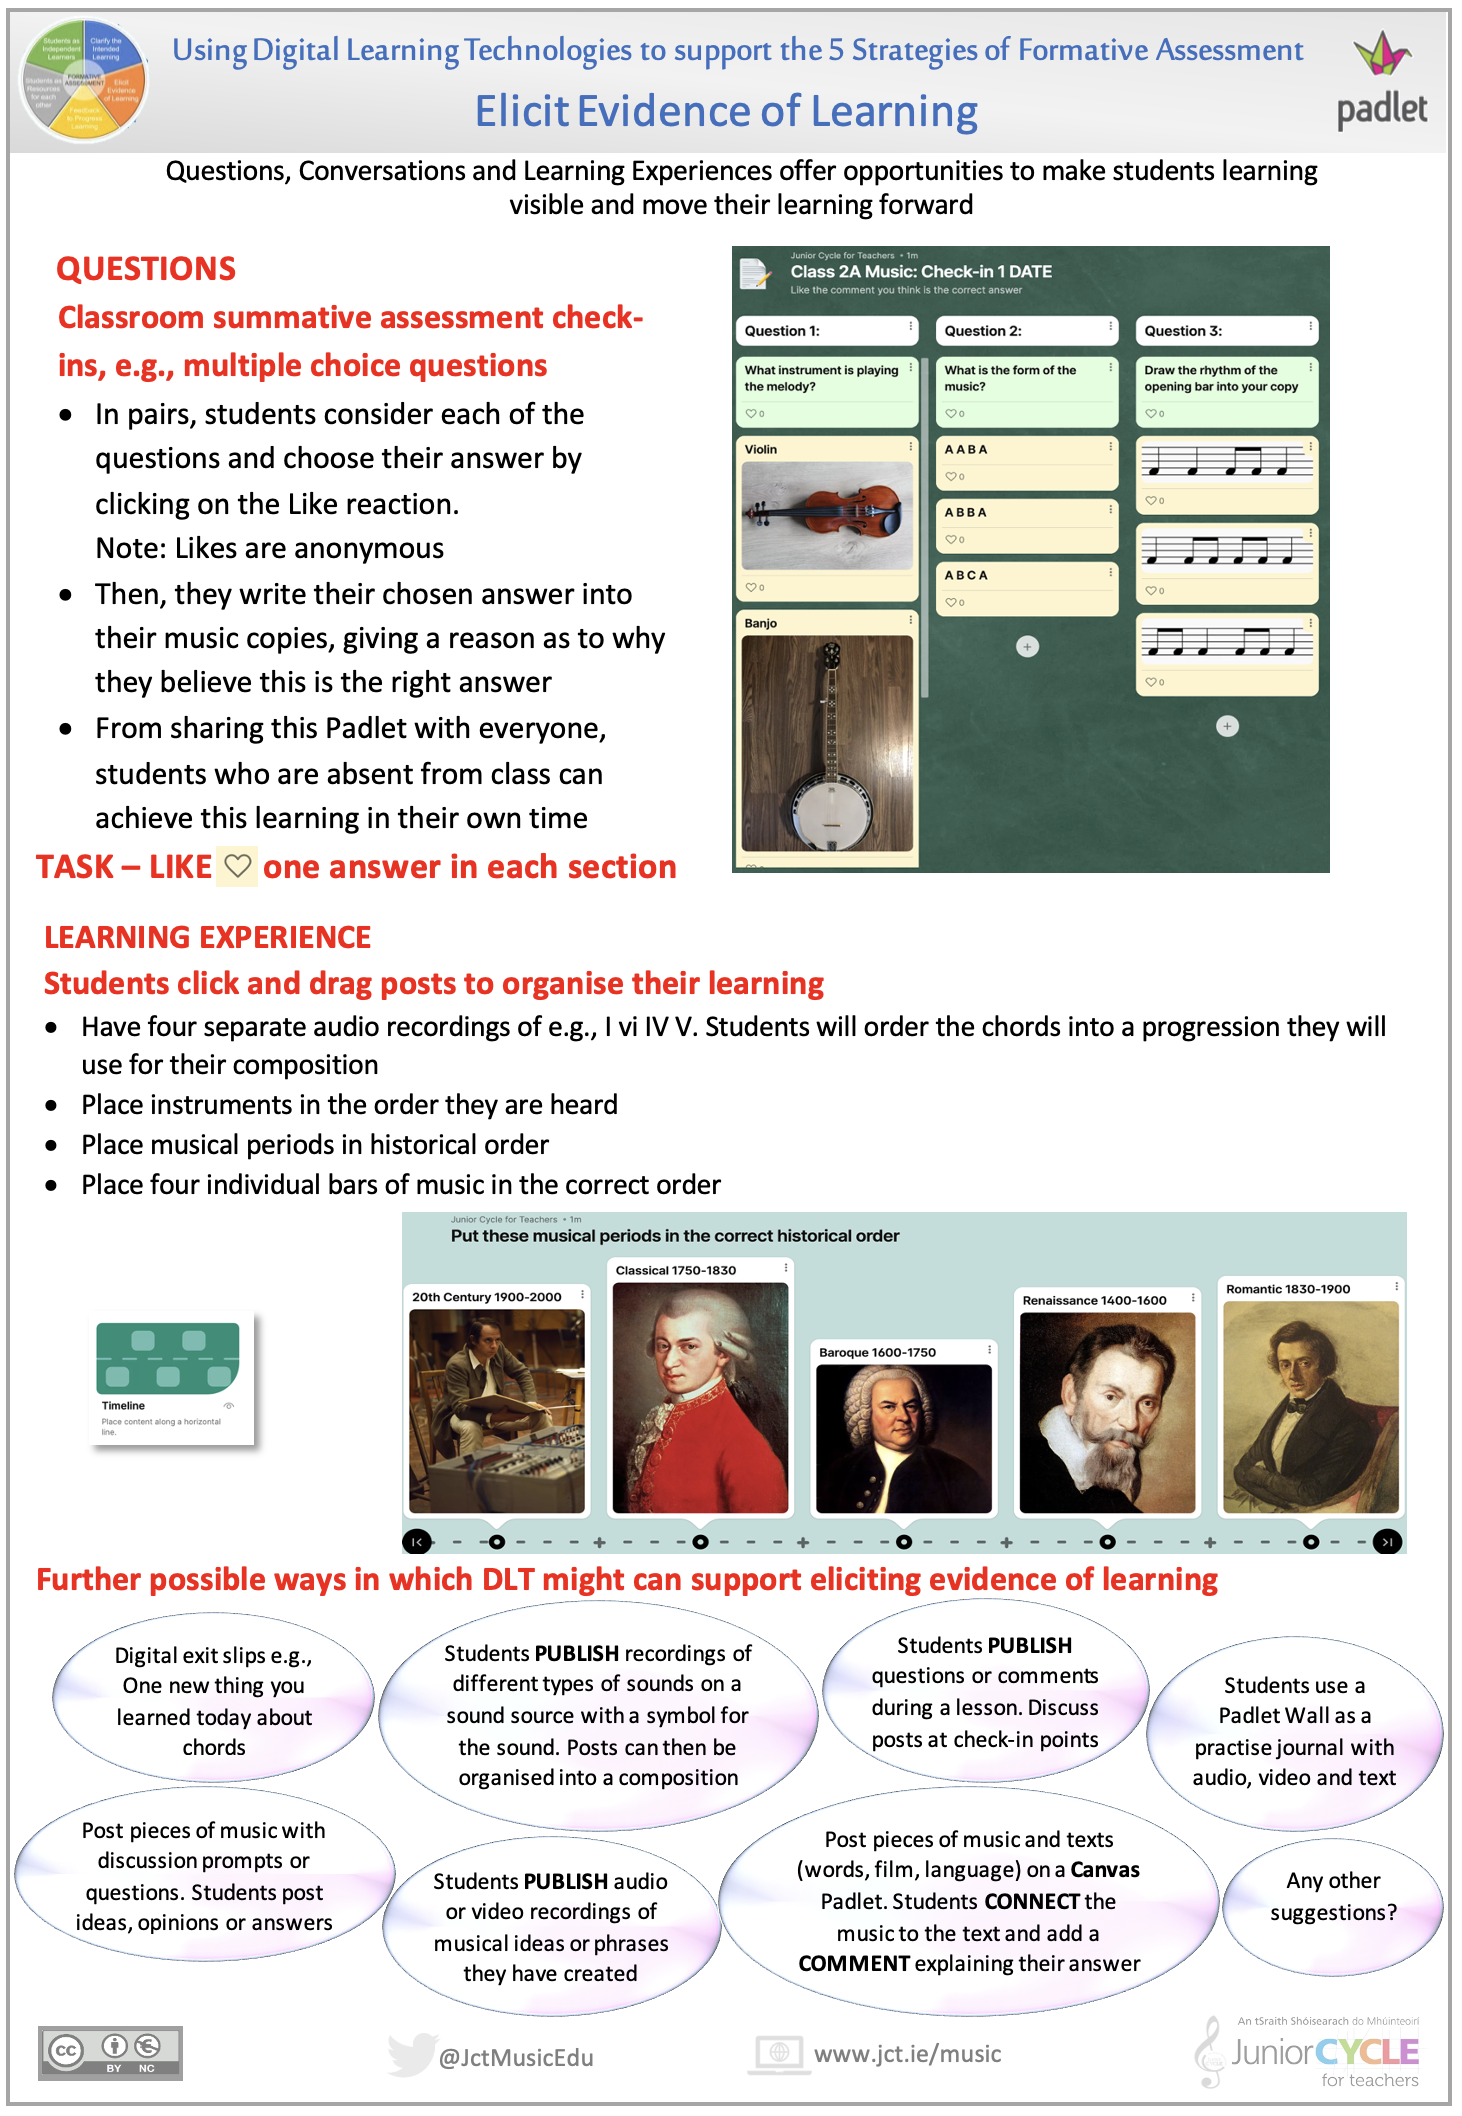 Elicit Evidence of Learning - Padlet